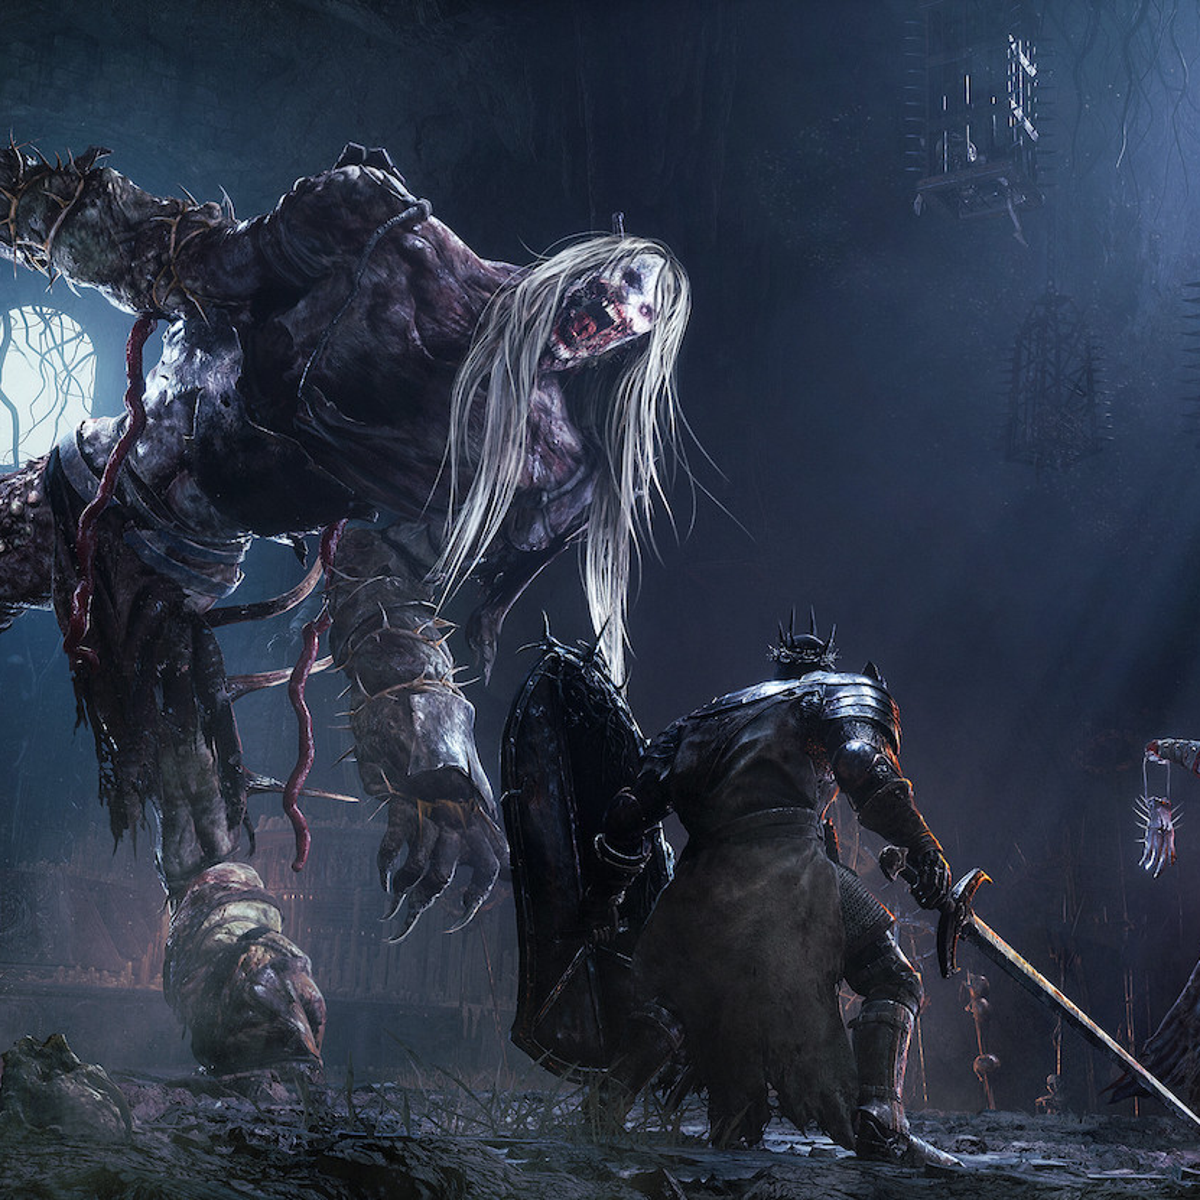 Soulslike Lords Of The Fallen's massive bosses and dual worlds look  stunning in newest deep dive